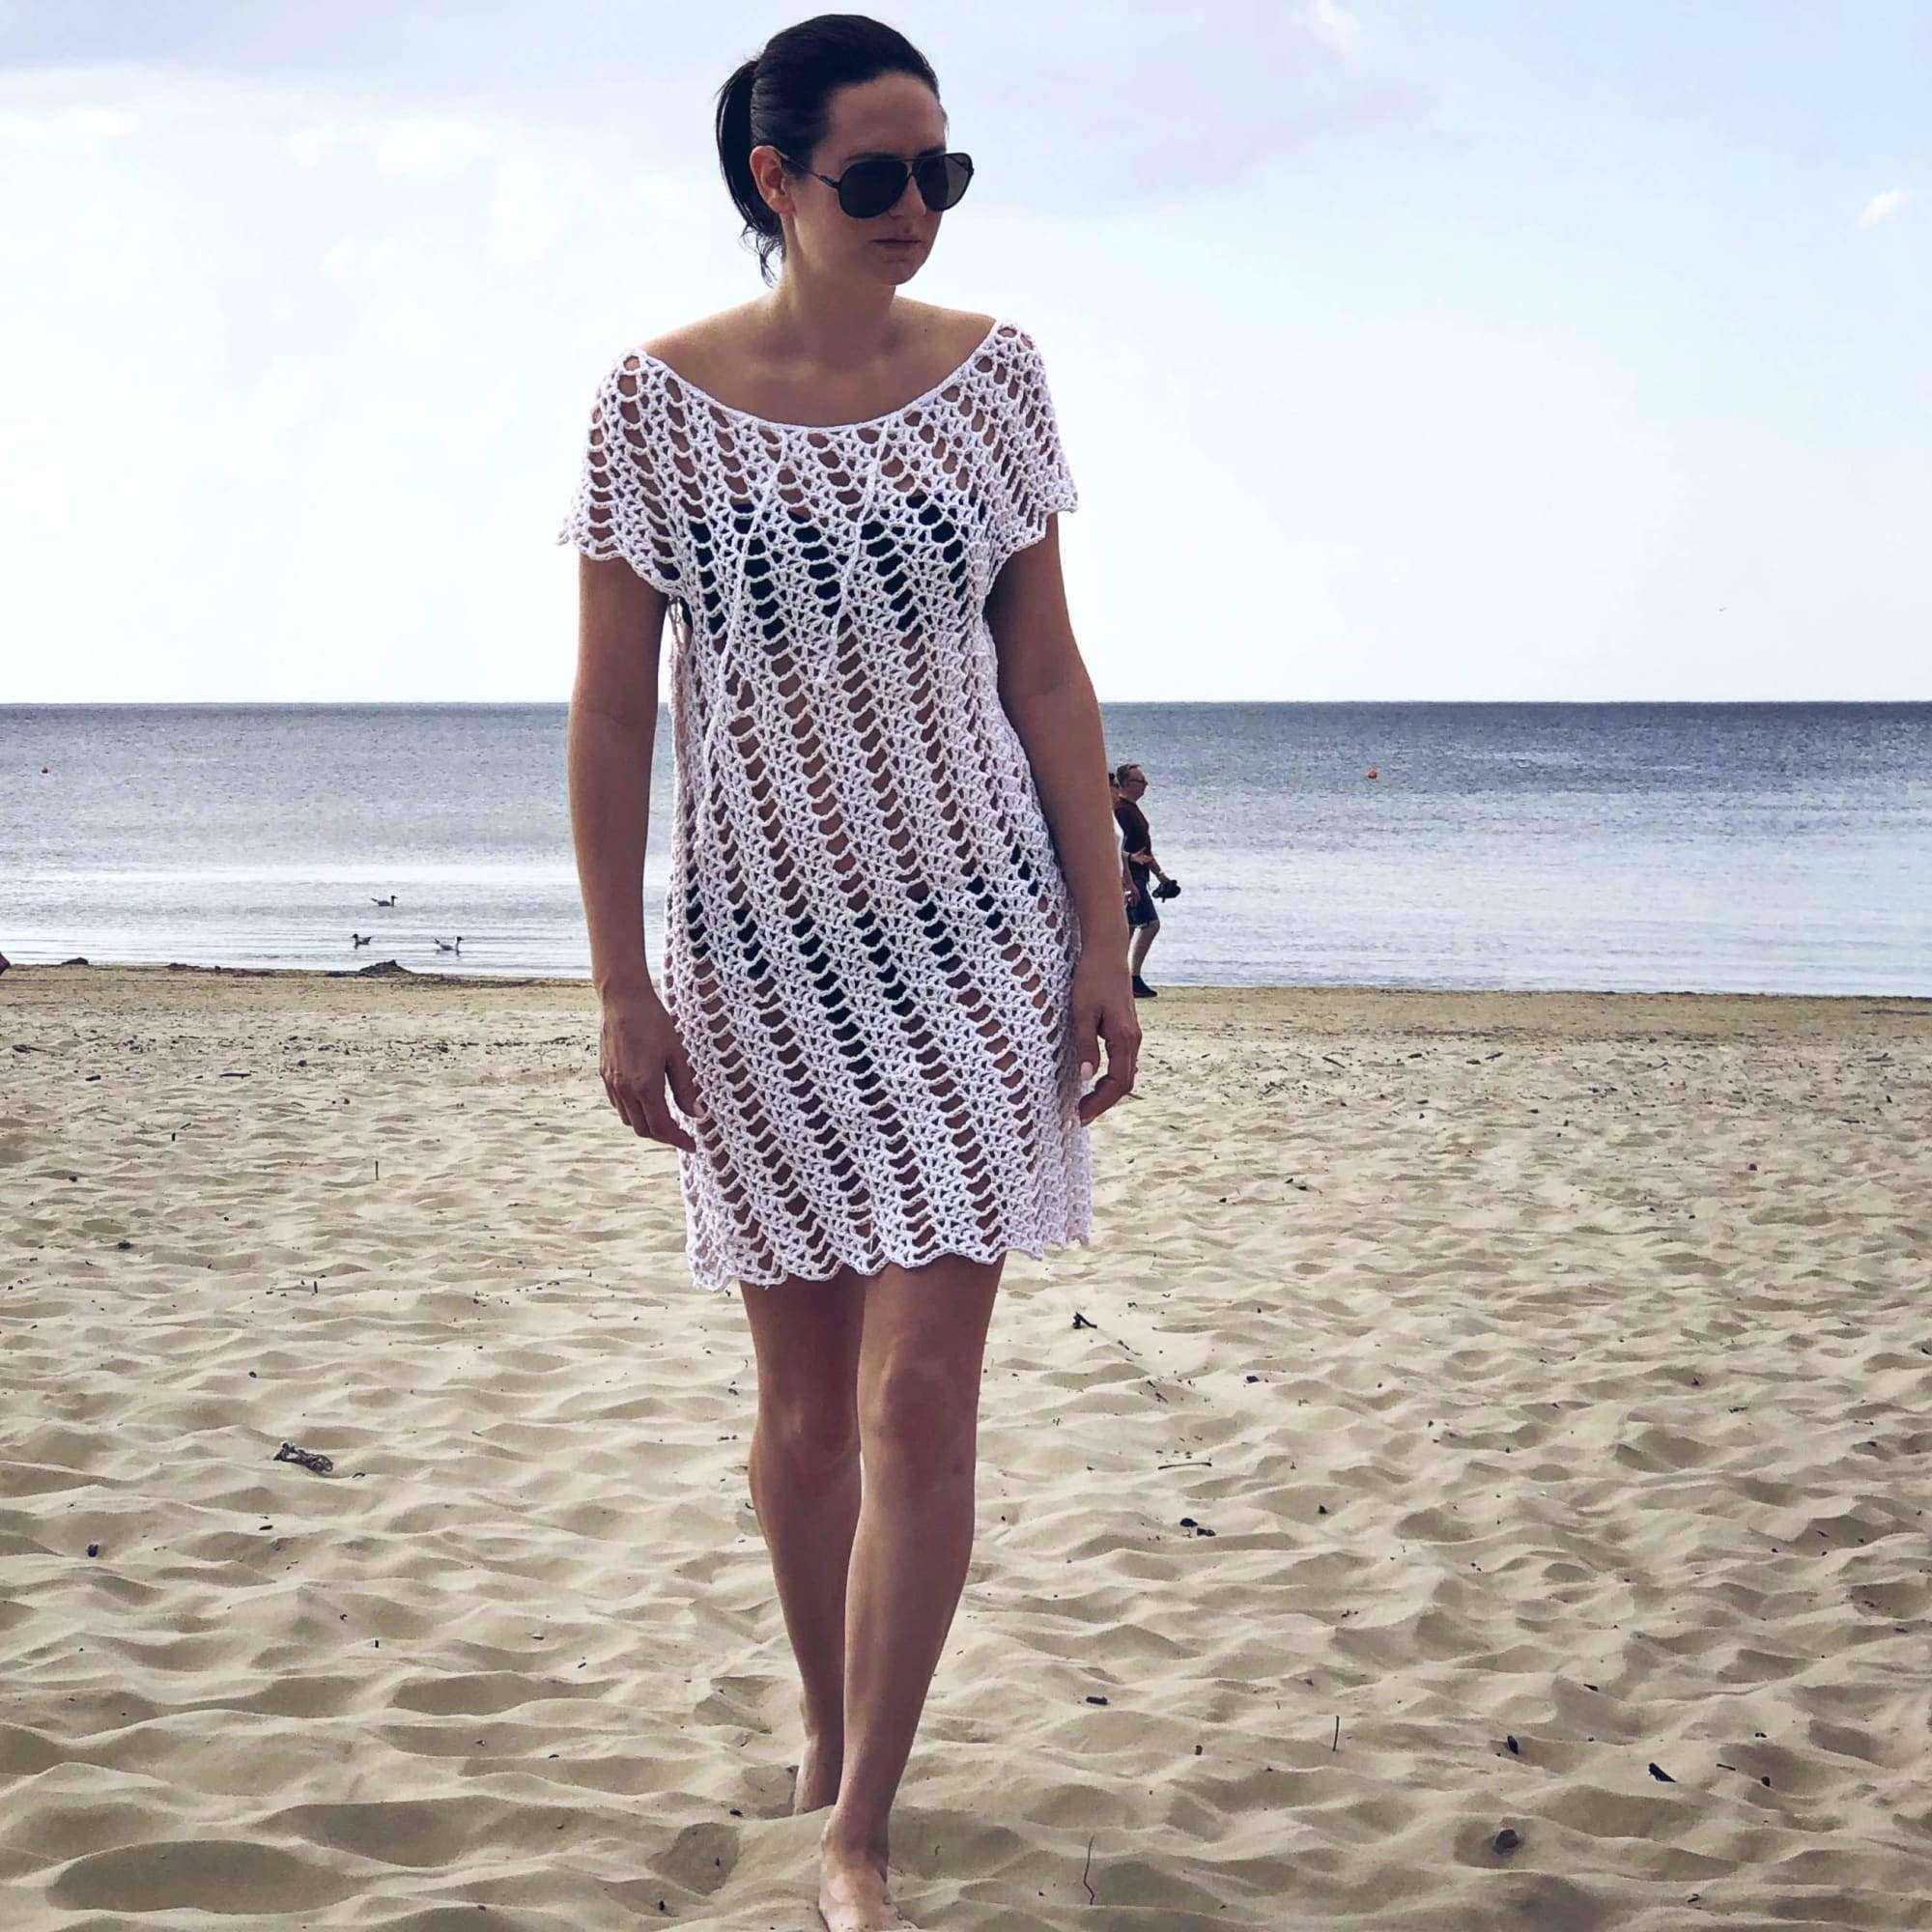 Crochet Pattern - Afelia Beach Dress - TheMailoDesign - Dresses, Tops & Skirts - TheMailoDesign